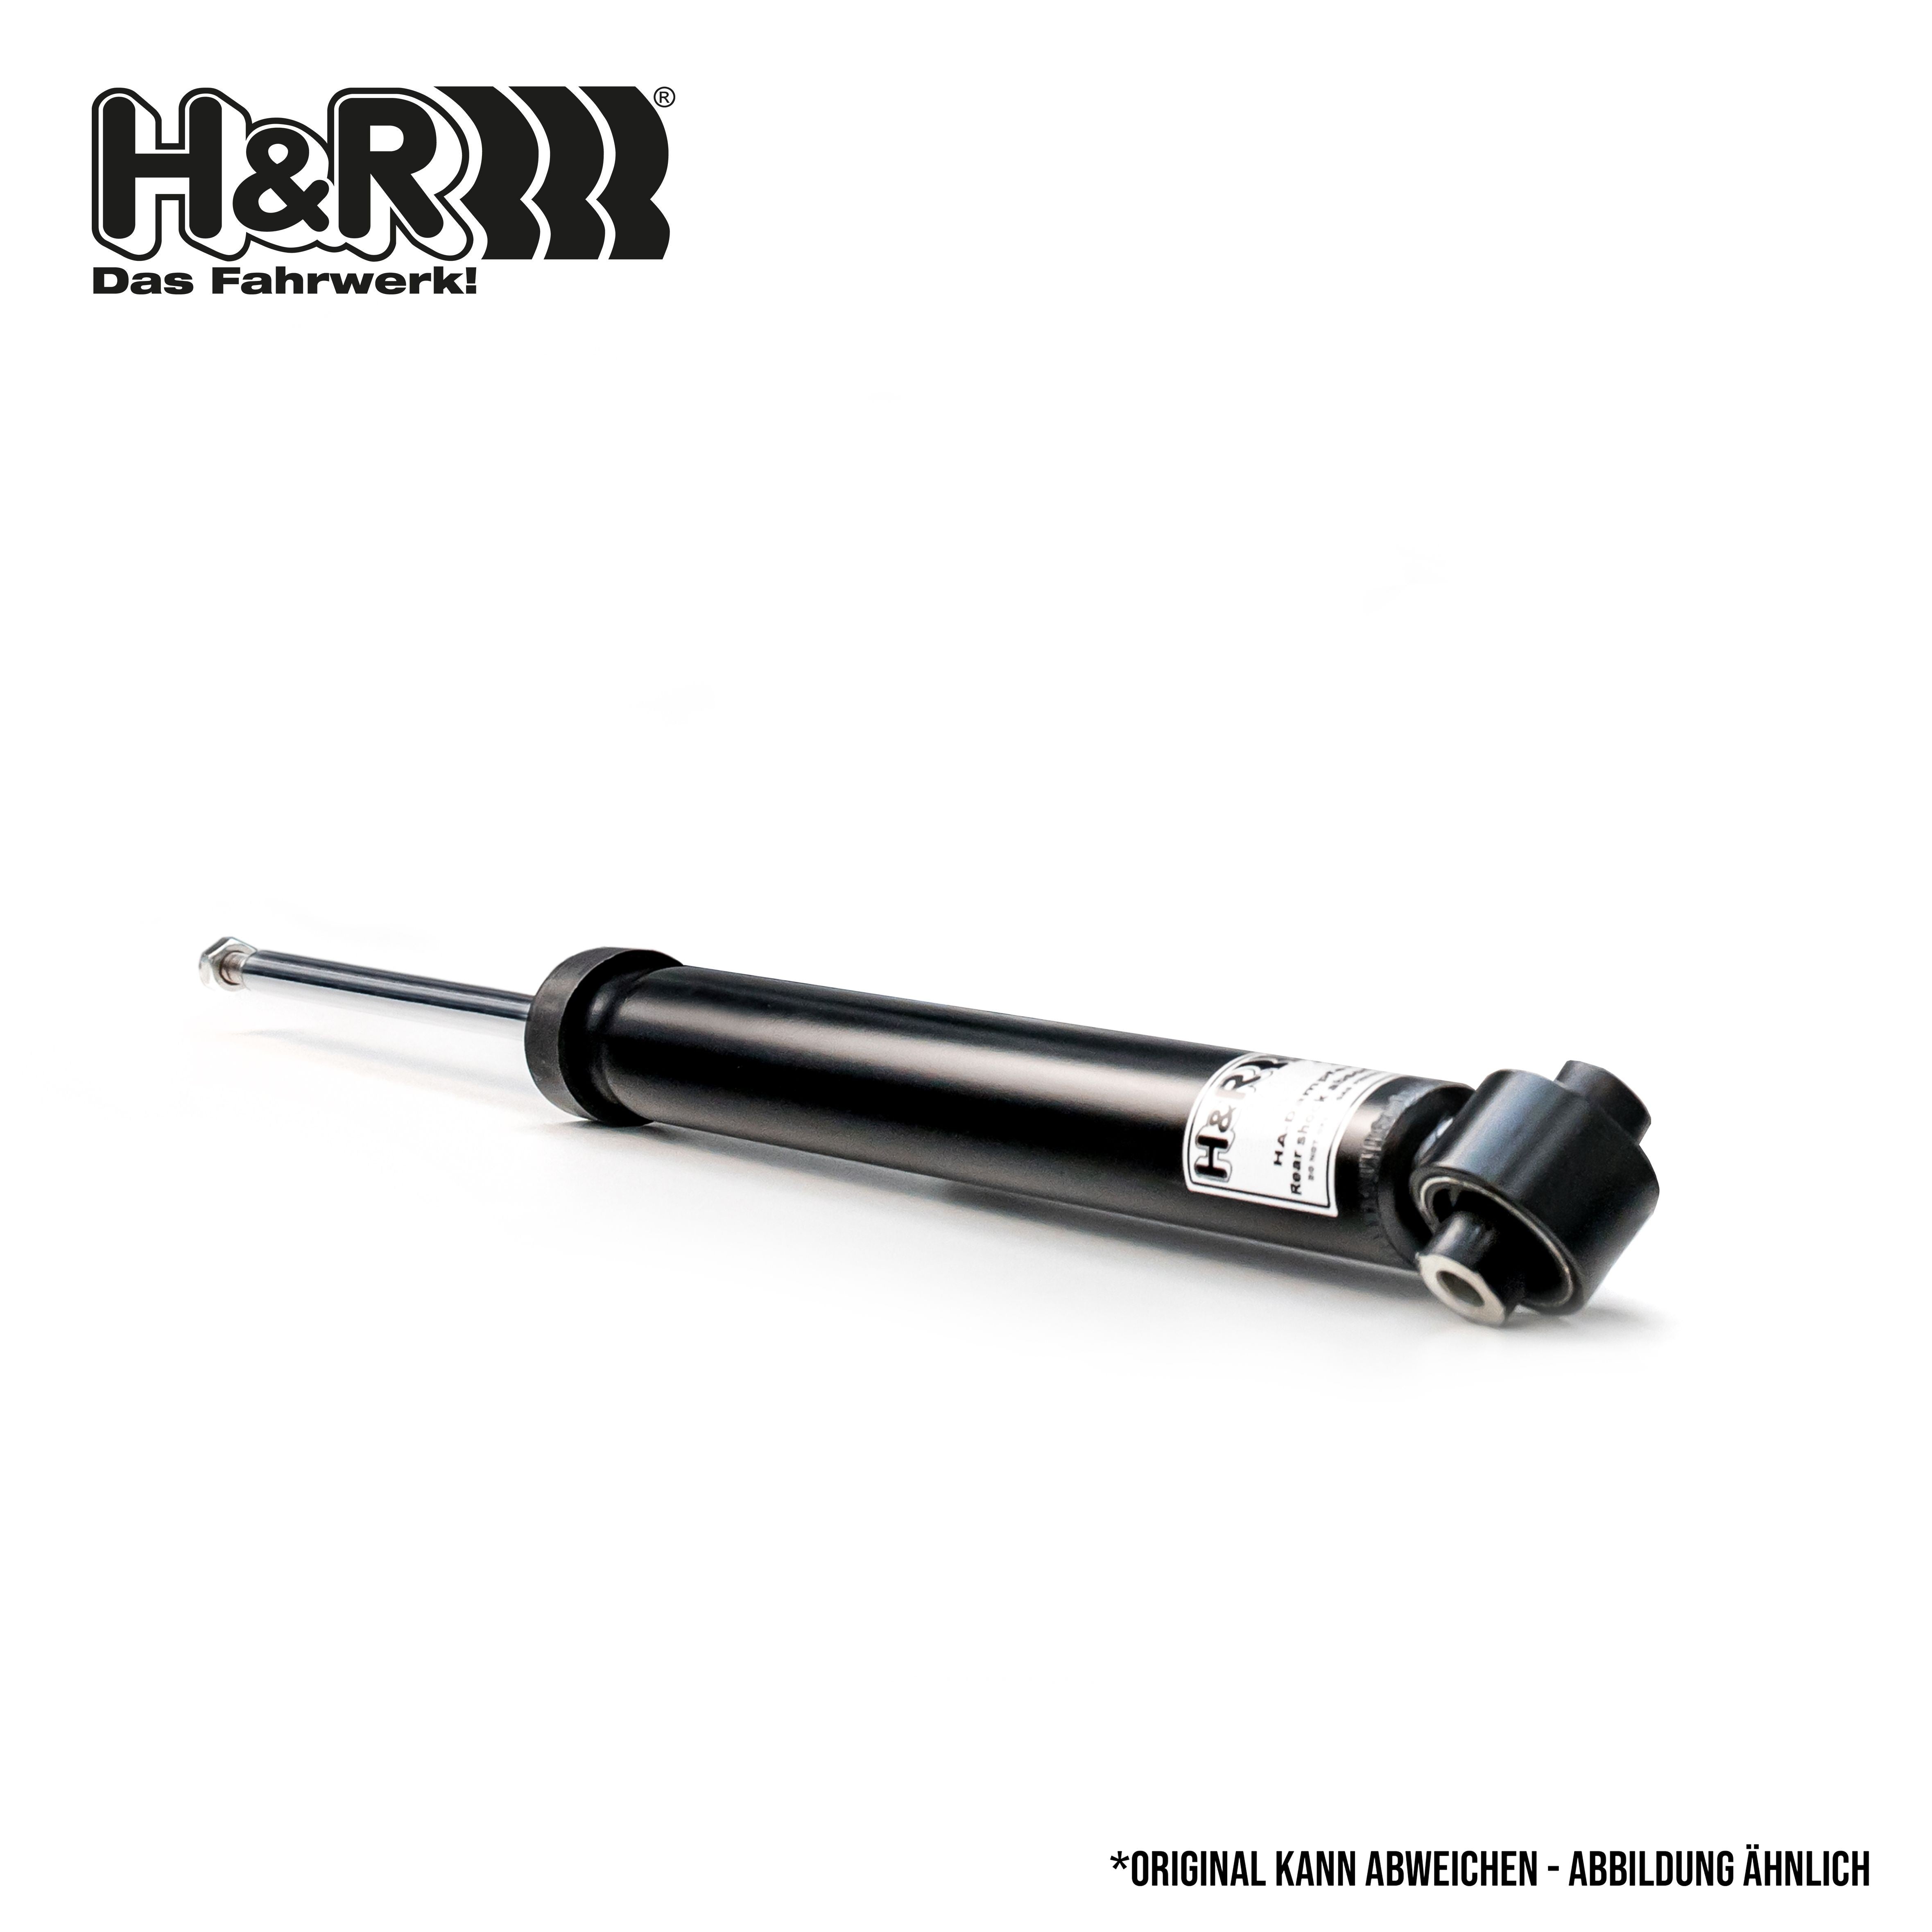 H&R 98-05 Volkswagen Golf/Jetta Replacement Front Strut (From Kit 36525-1)